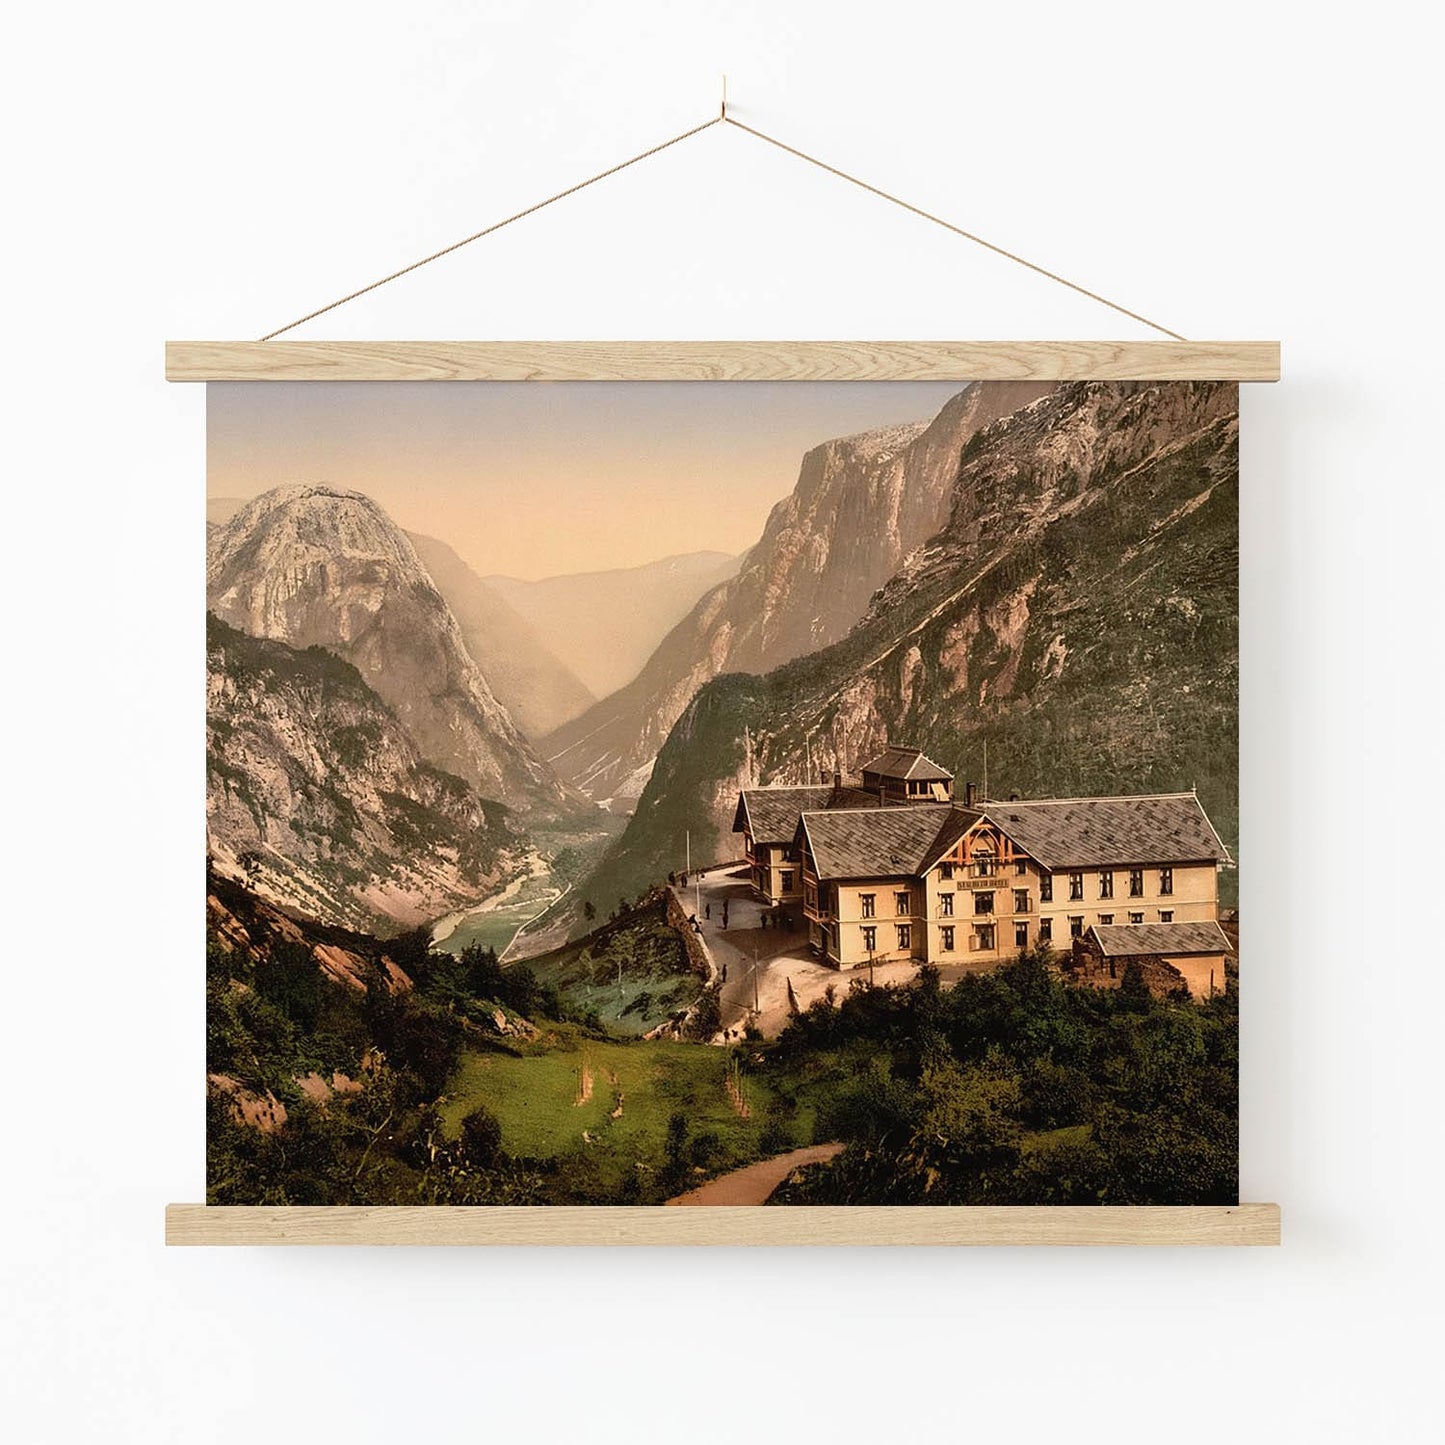 Mountains and River Art Print in Wood Hanger Frame on Wall